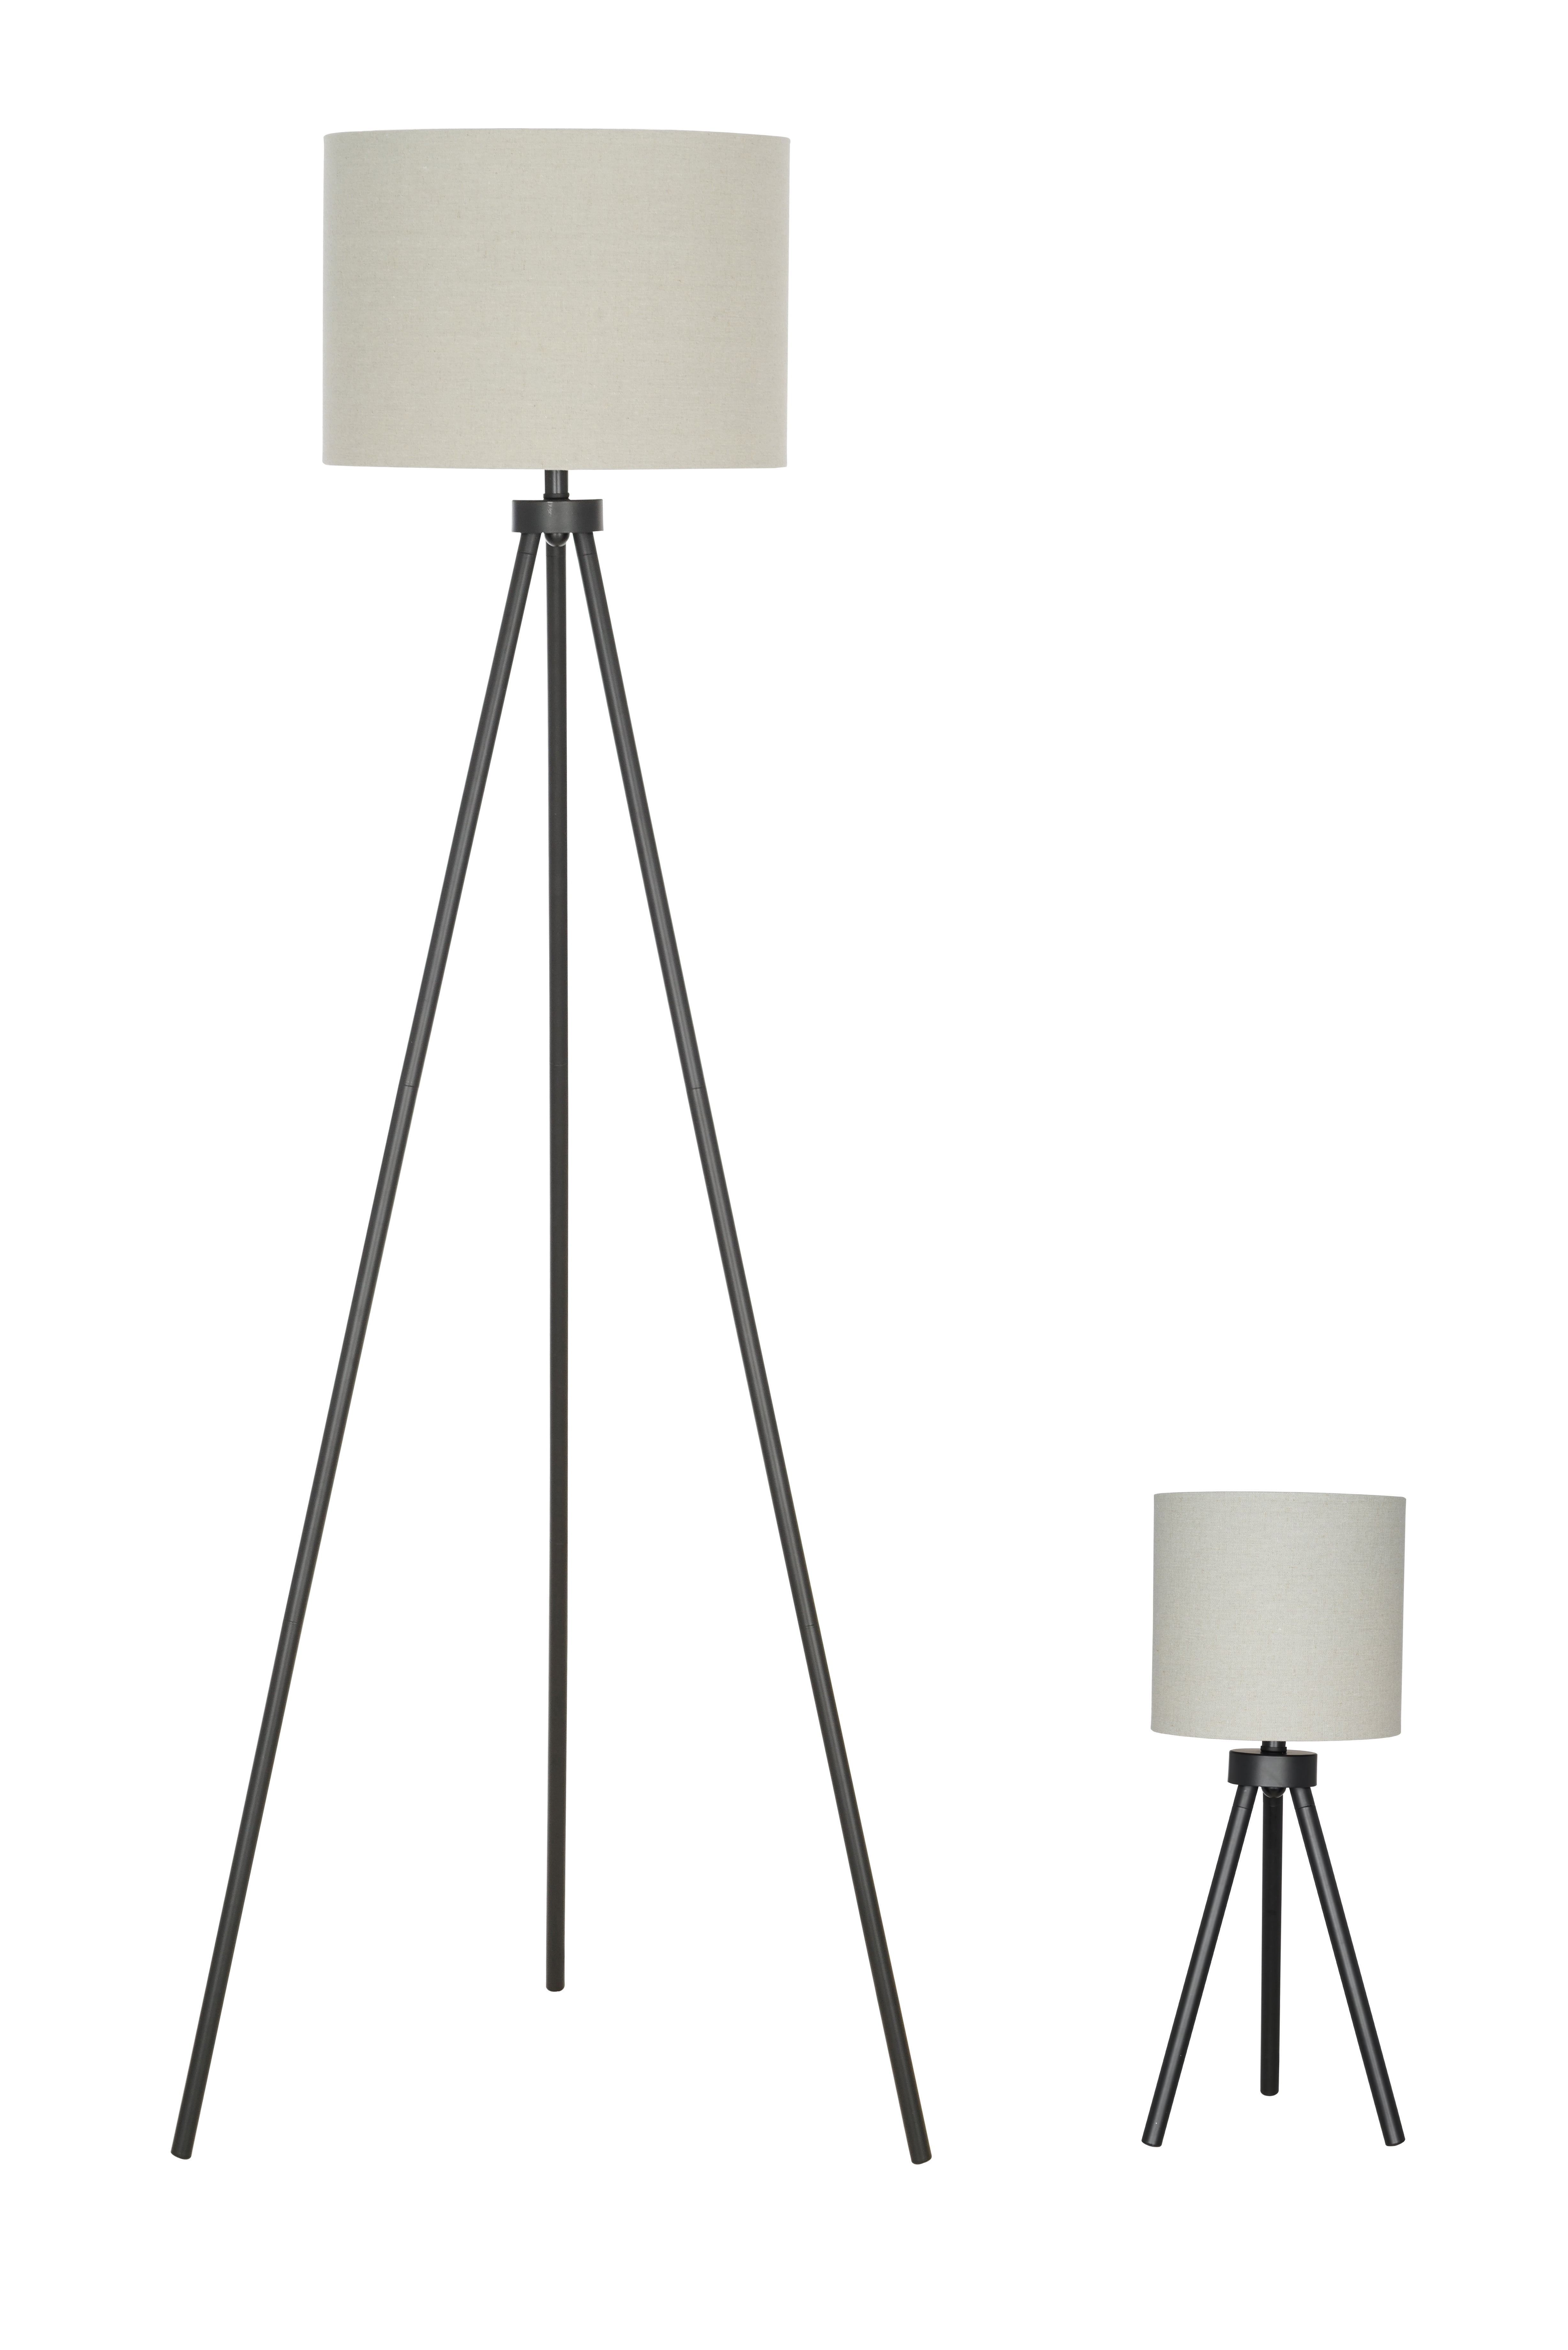 Better Homes Gardens Modern Tripod, Black Tripod Table Lamp With White Shade